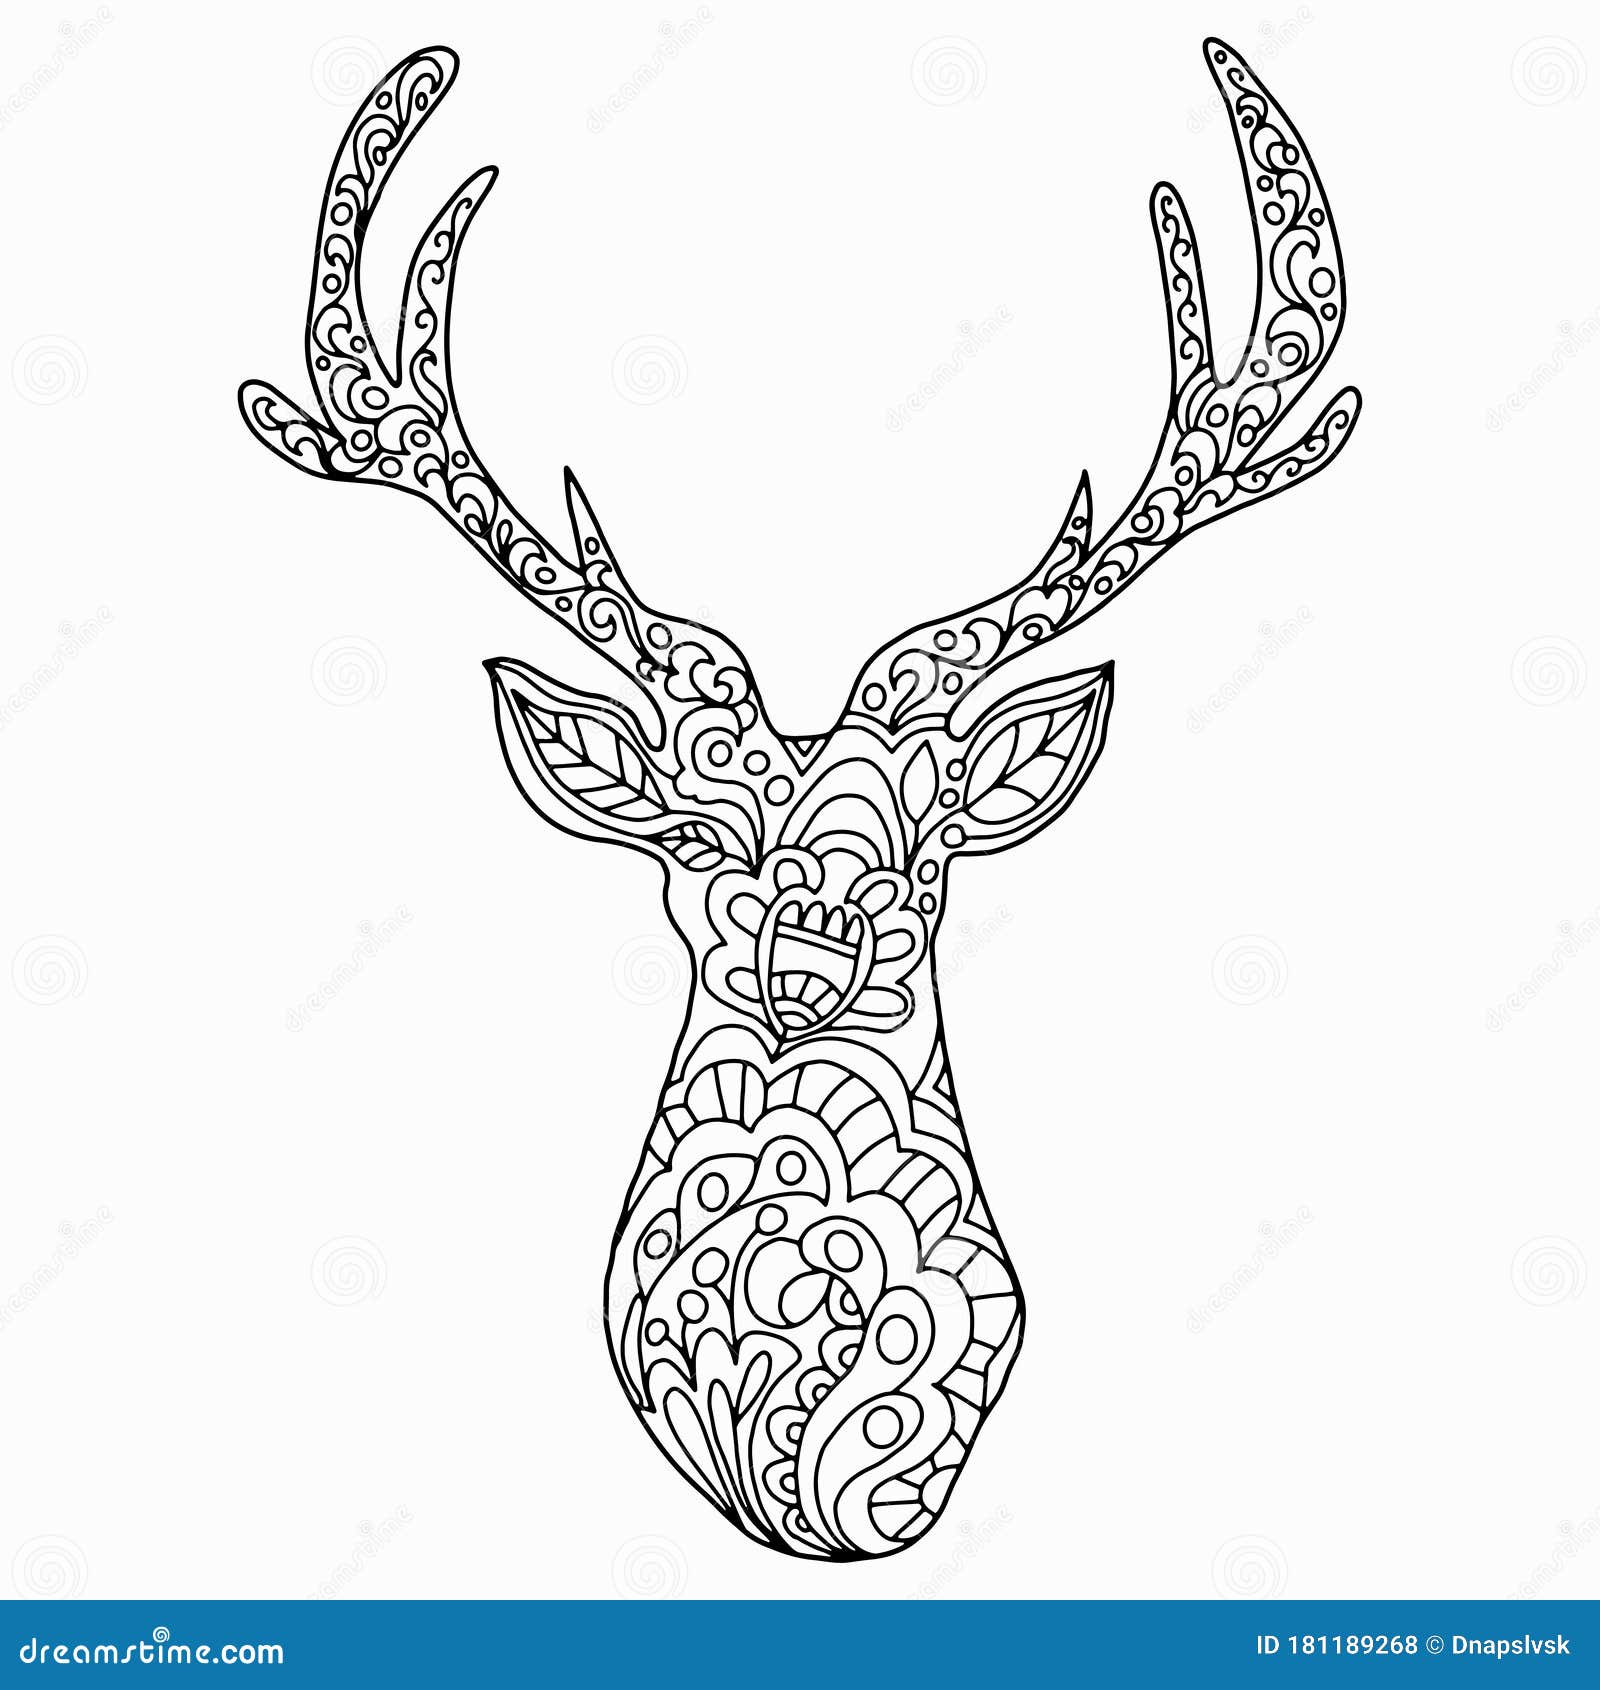 Deer Drawn with Floral Ornament on a White Background for Coloring ...